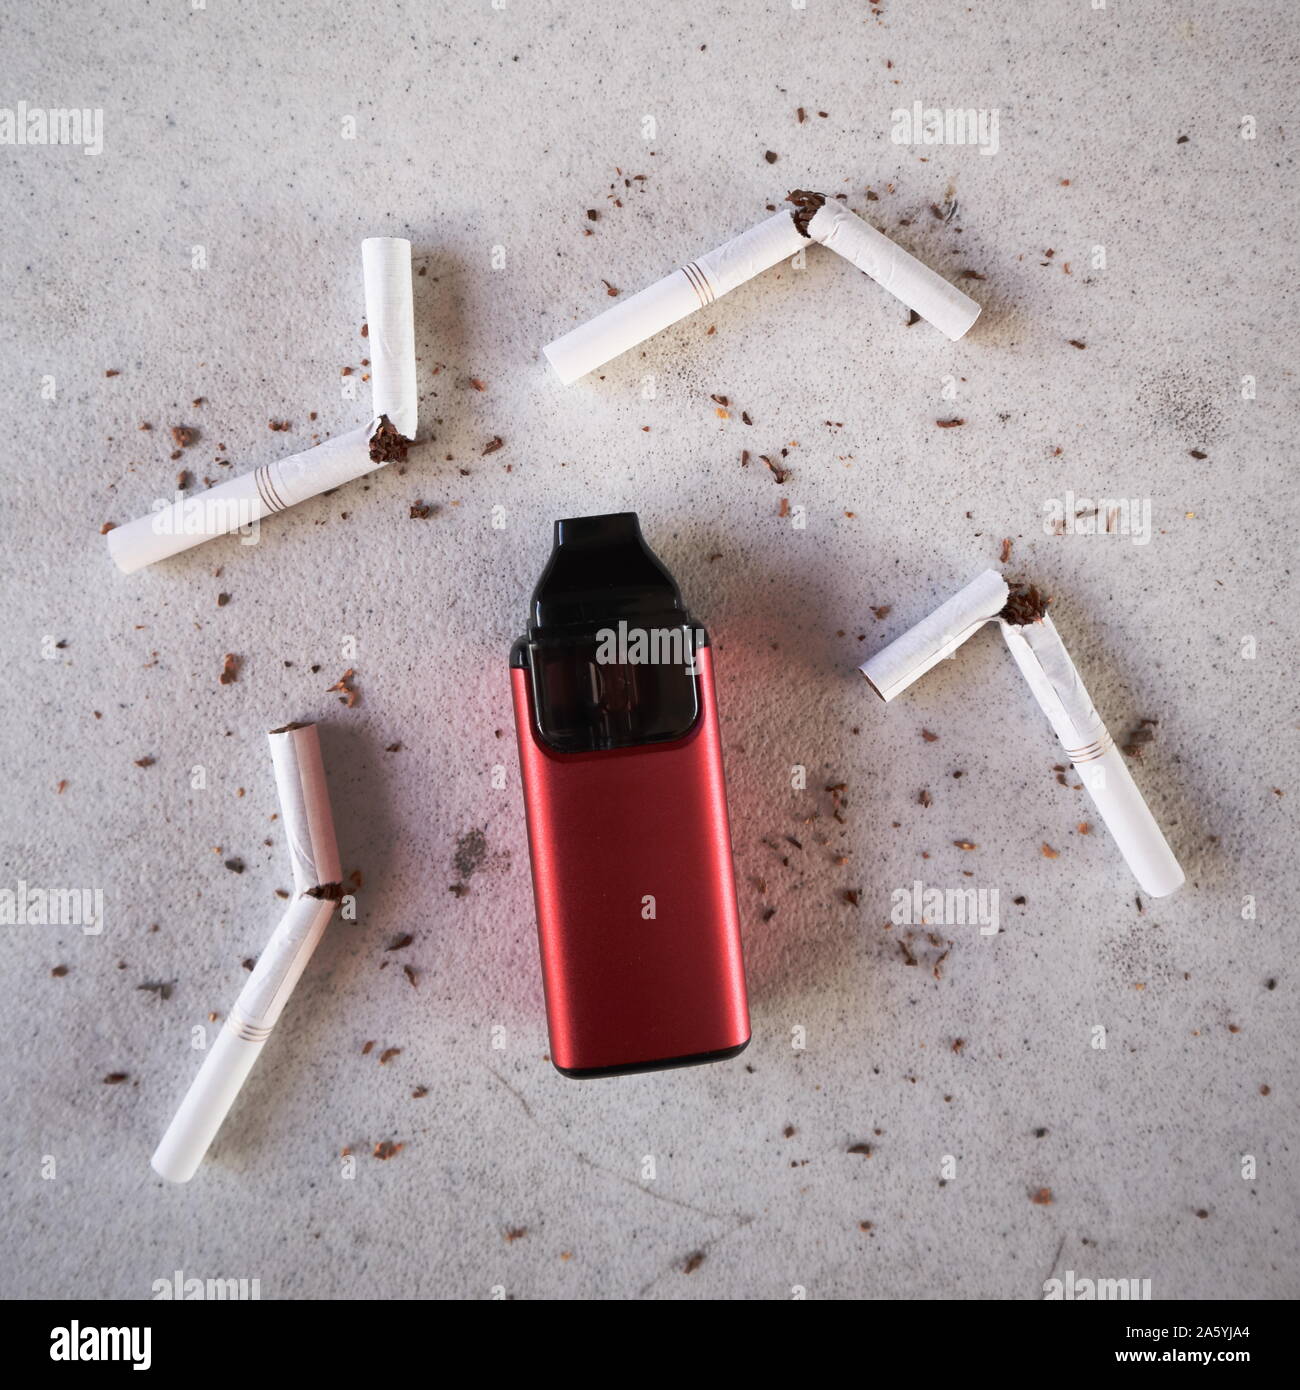 Single red vape electronic cigarette as smoking alternative with broken cigarettes and scattered tobacco on white textured background isolated Stock Photo